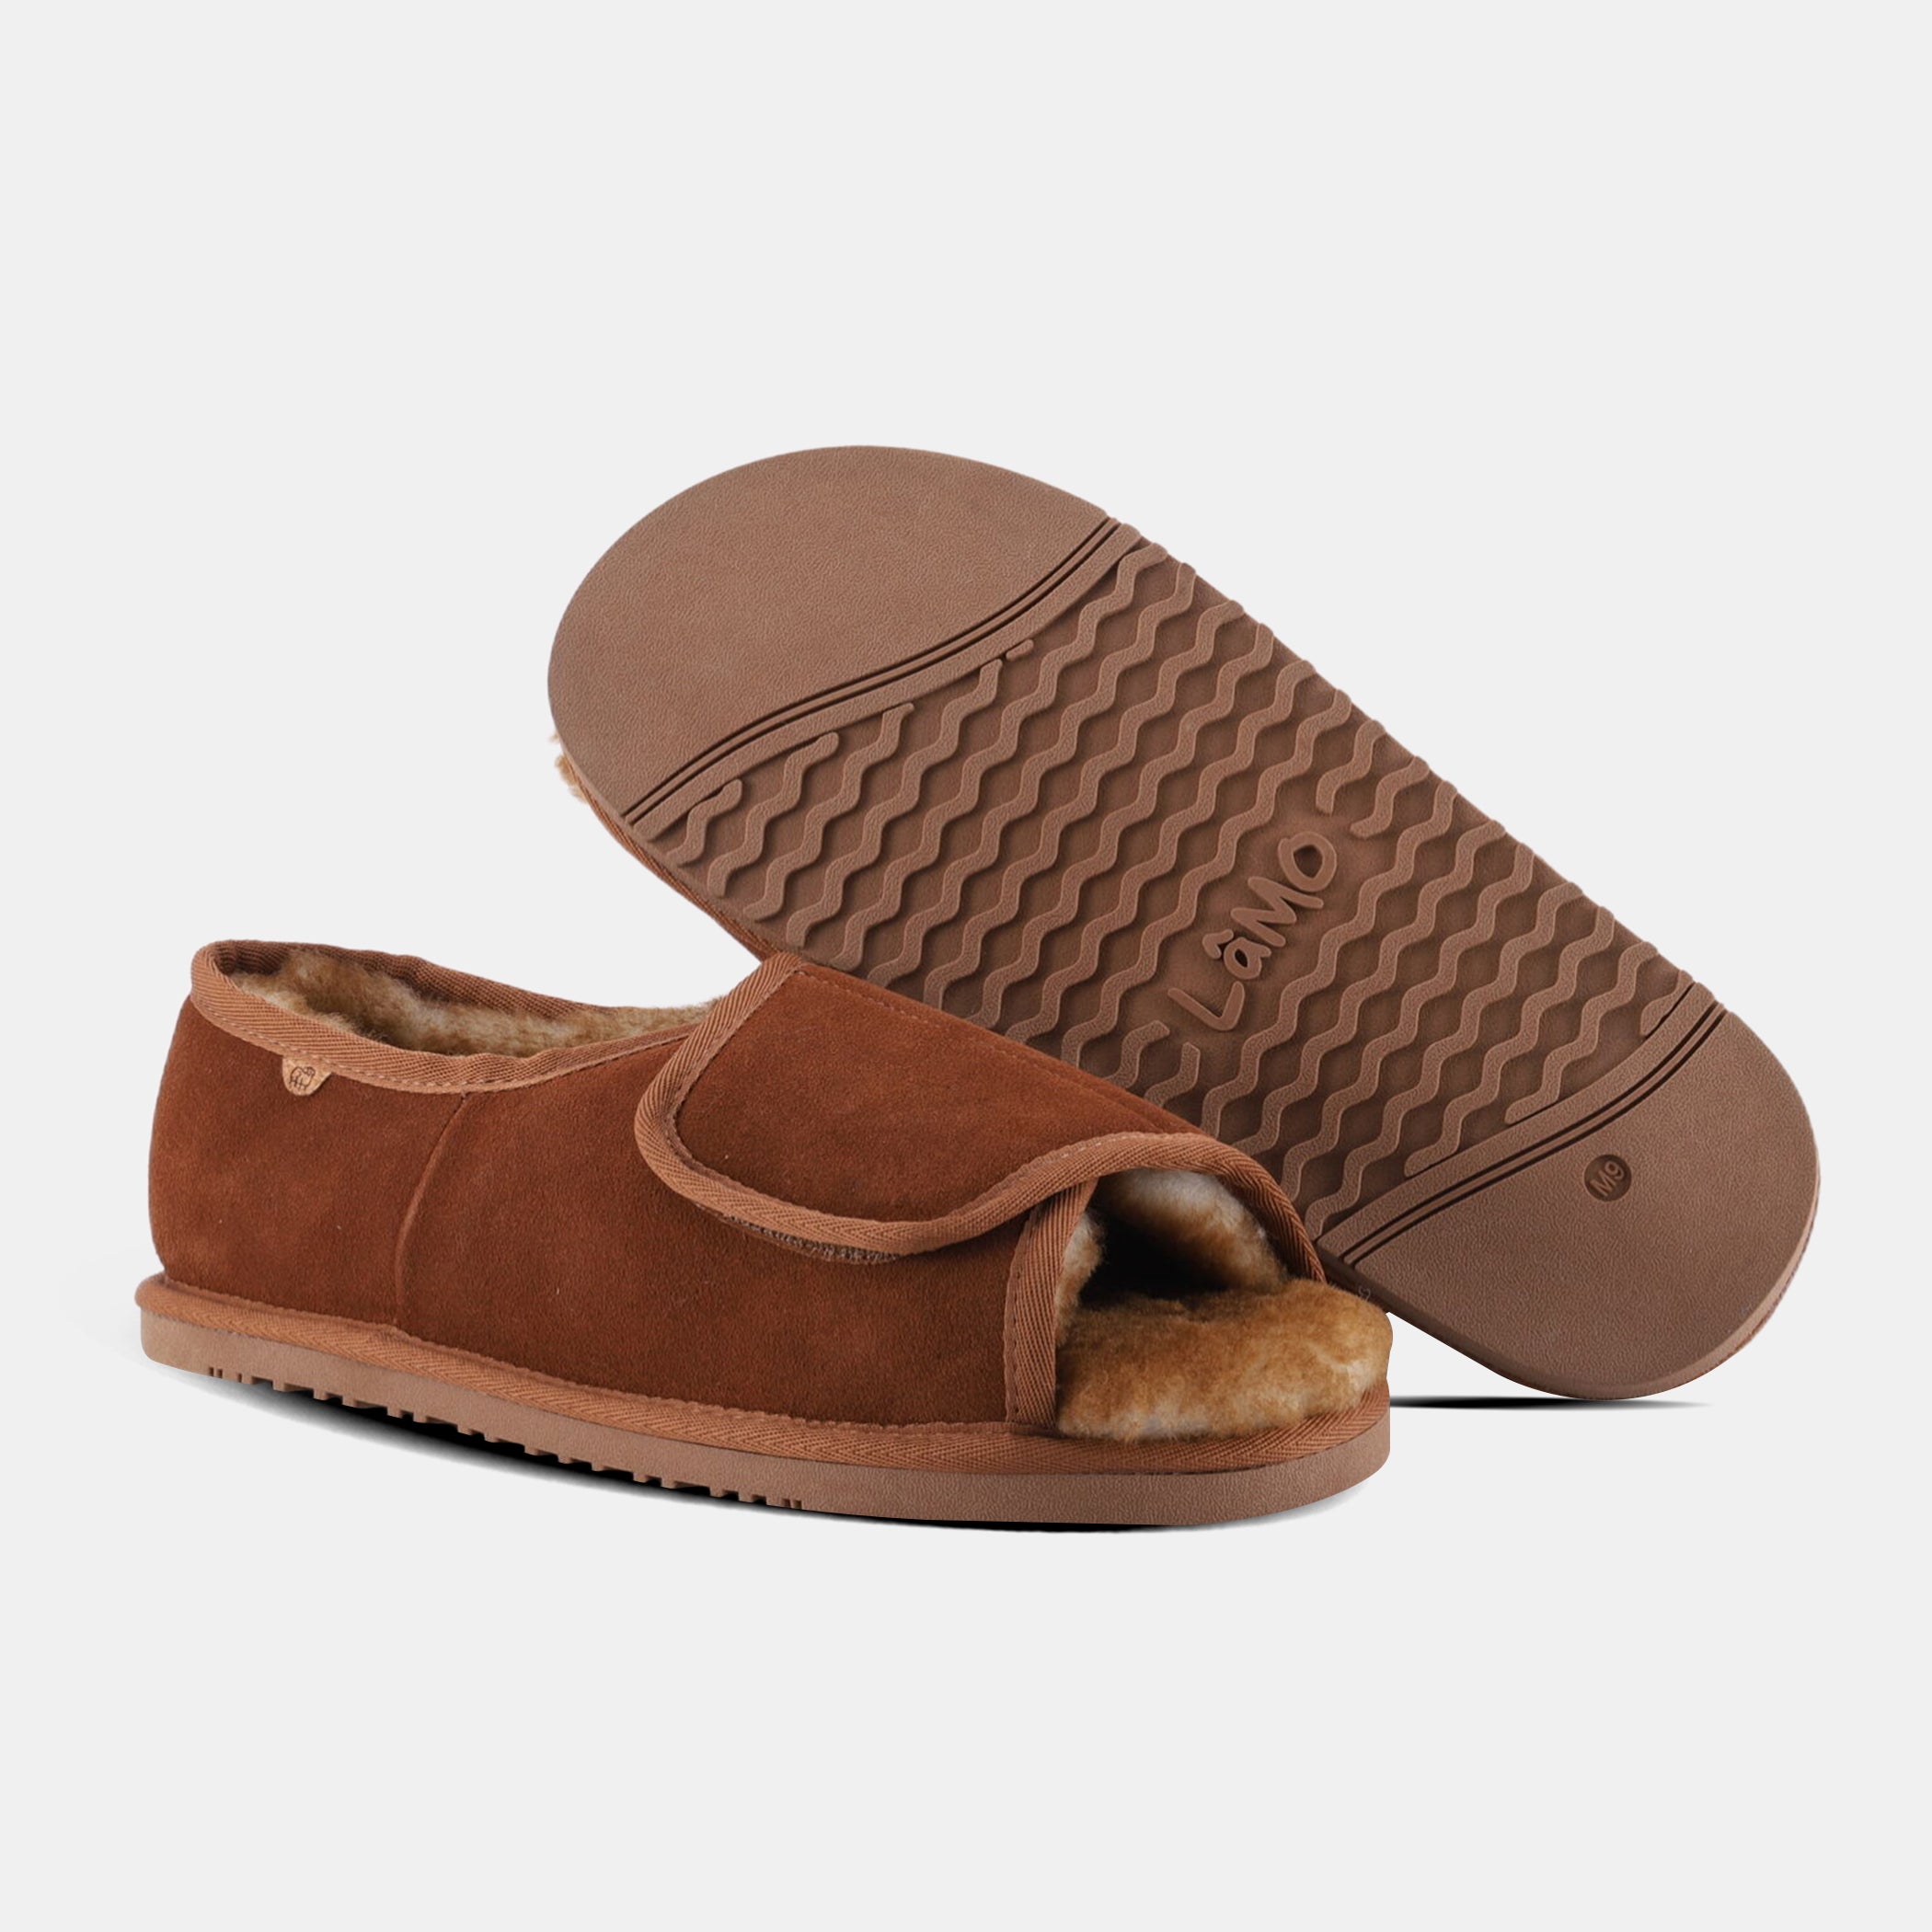 Buy Lakeland Leather Ladies Sheepskin Cuff Slippers from Next Canada